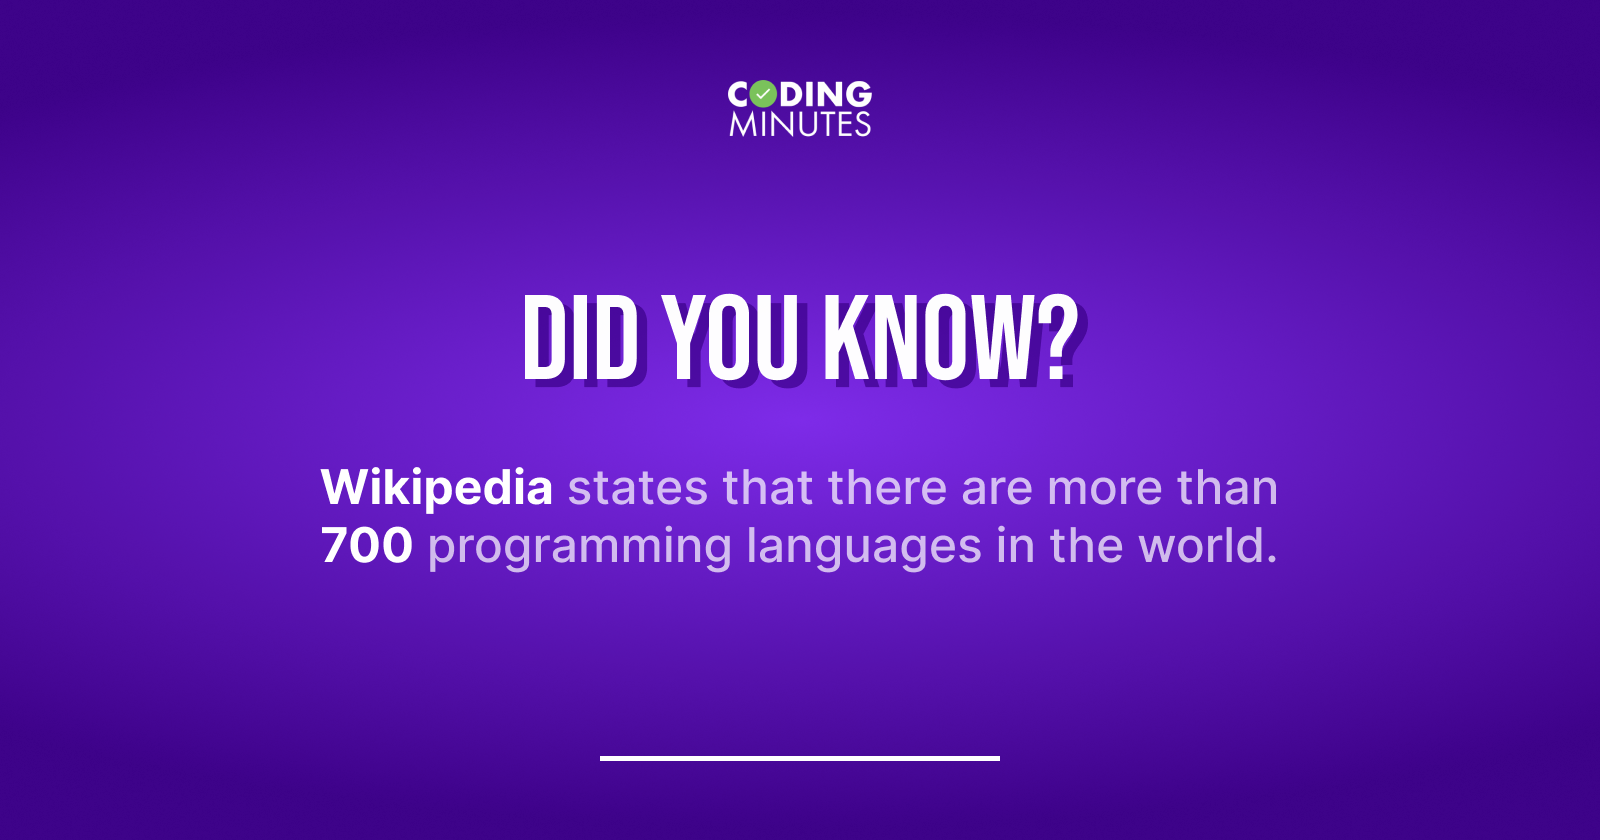 There are more than 700 programming languages in the world